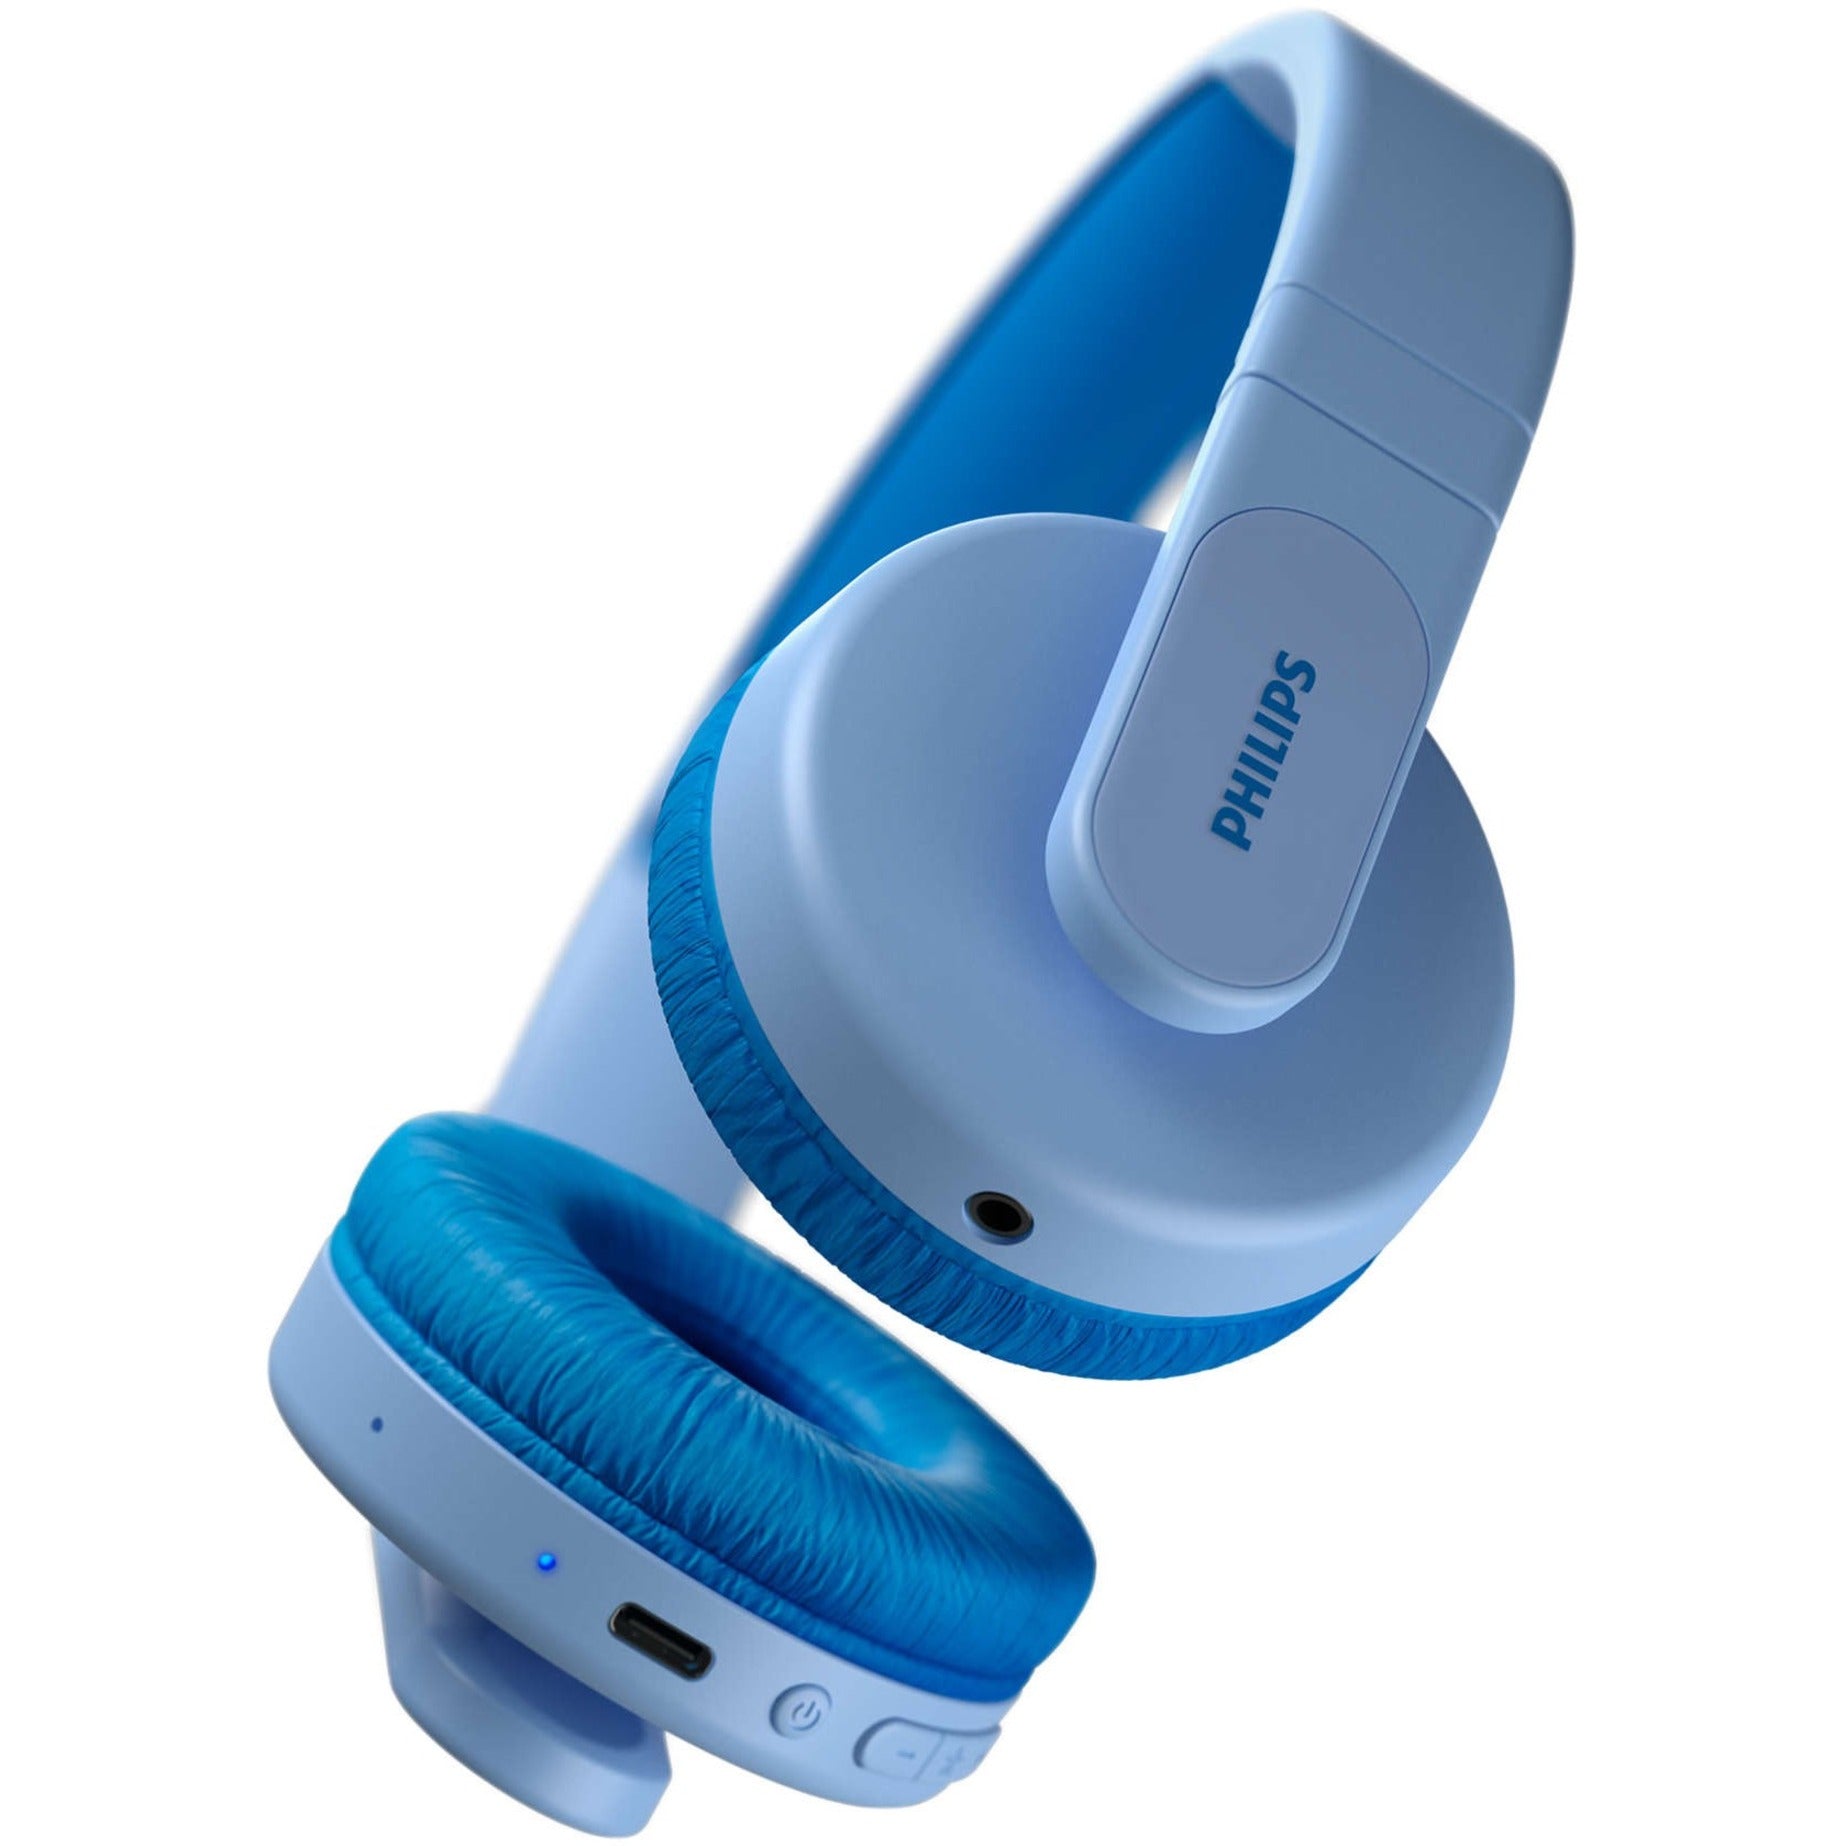 Philips TAK4206BL/00 Headset, Lightweight, Foldable, Rechargeable Battery, Bluetooth, 28 Hour Battery Life, Blue